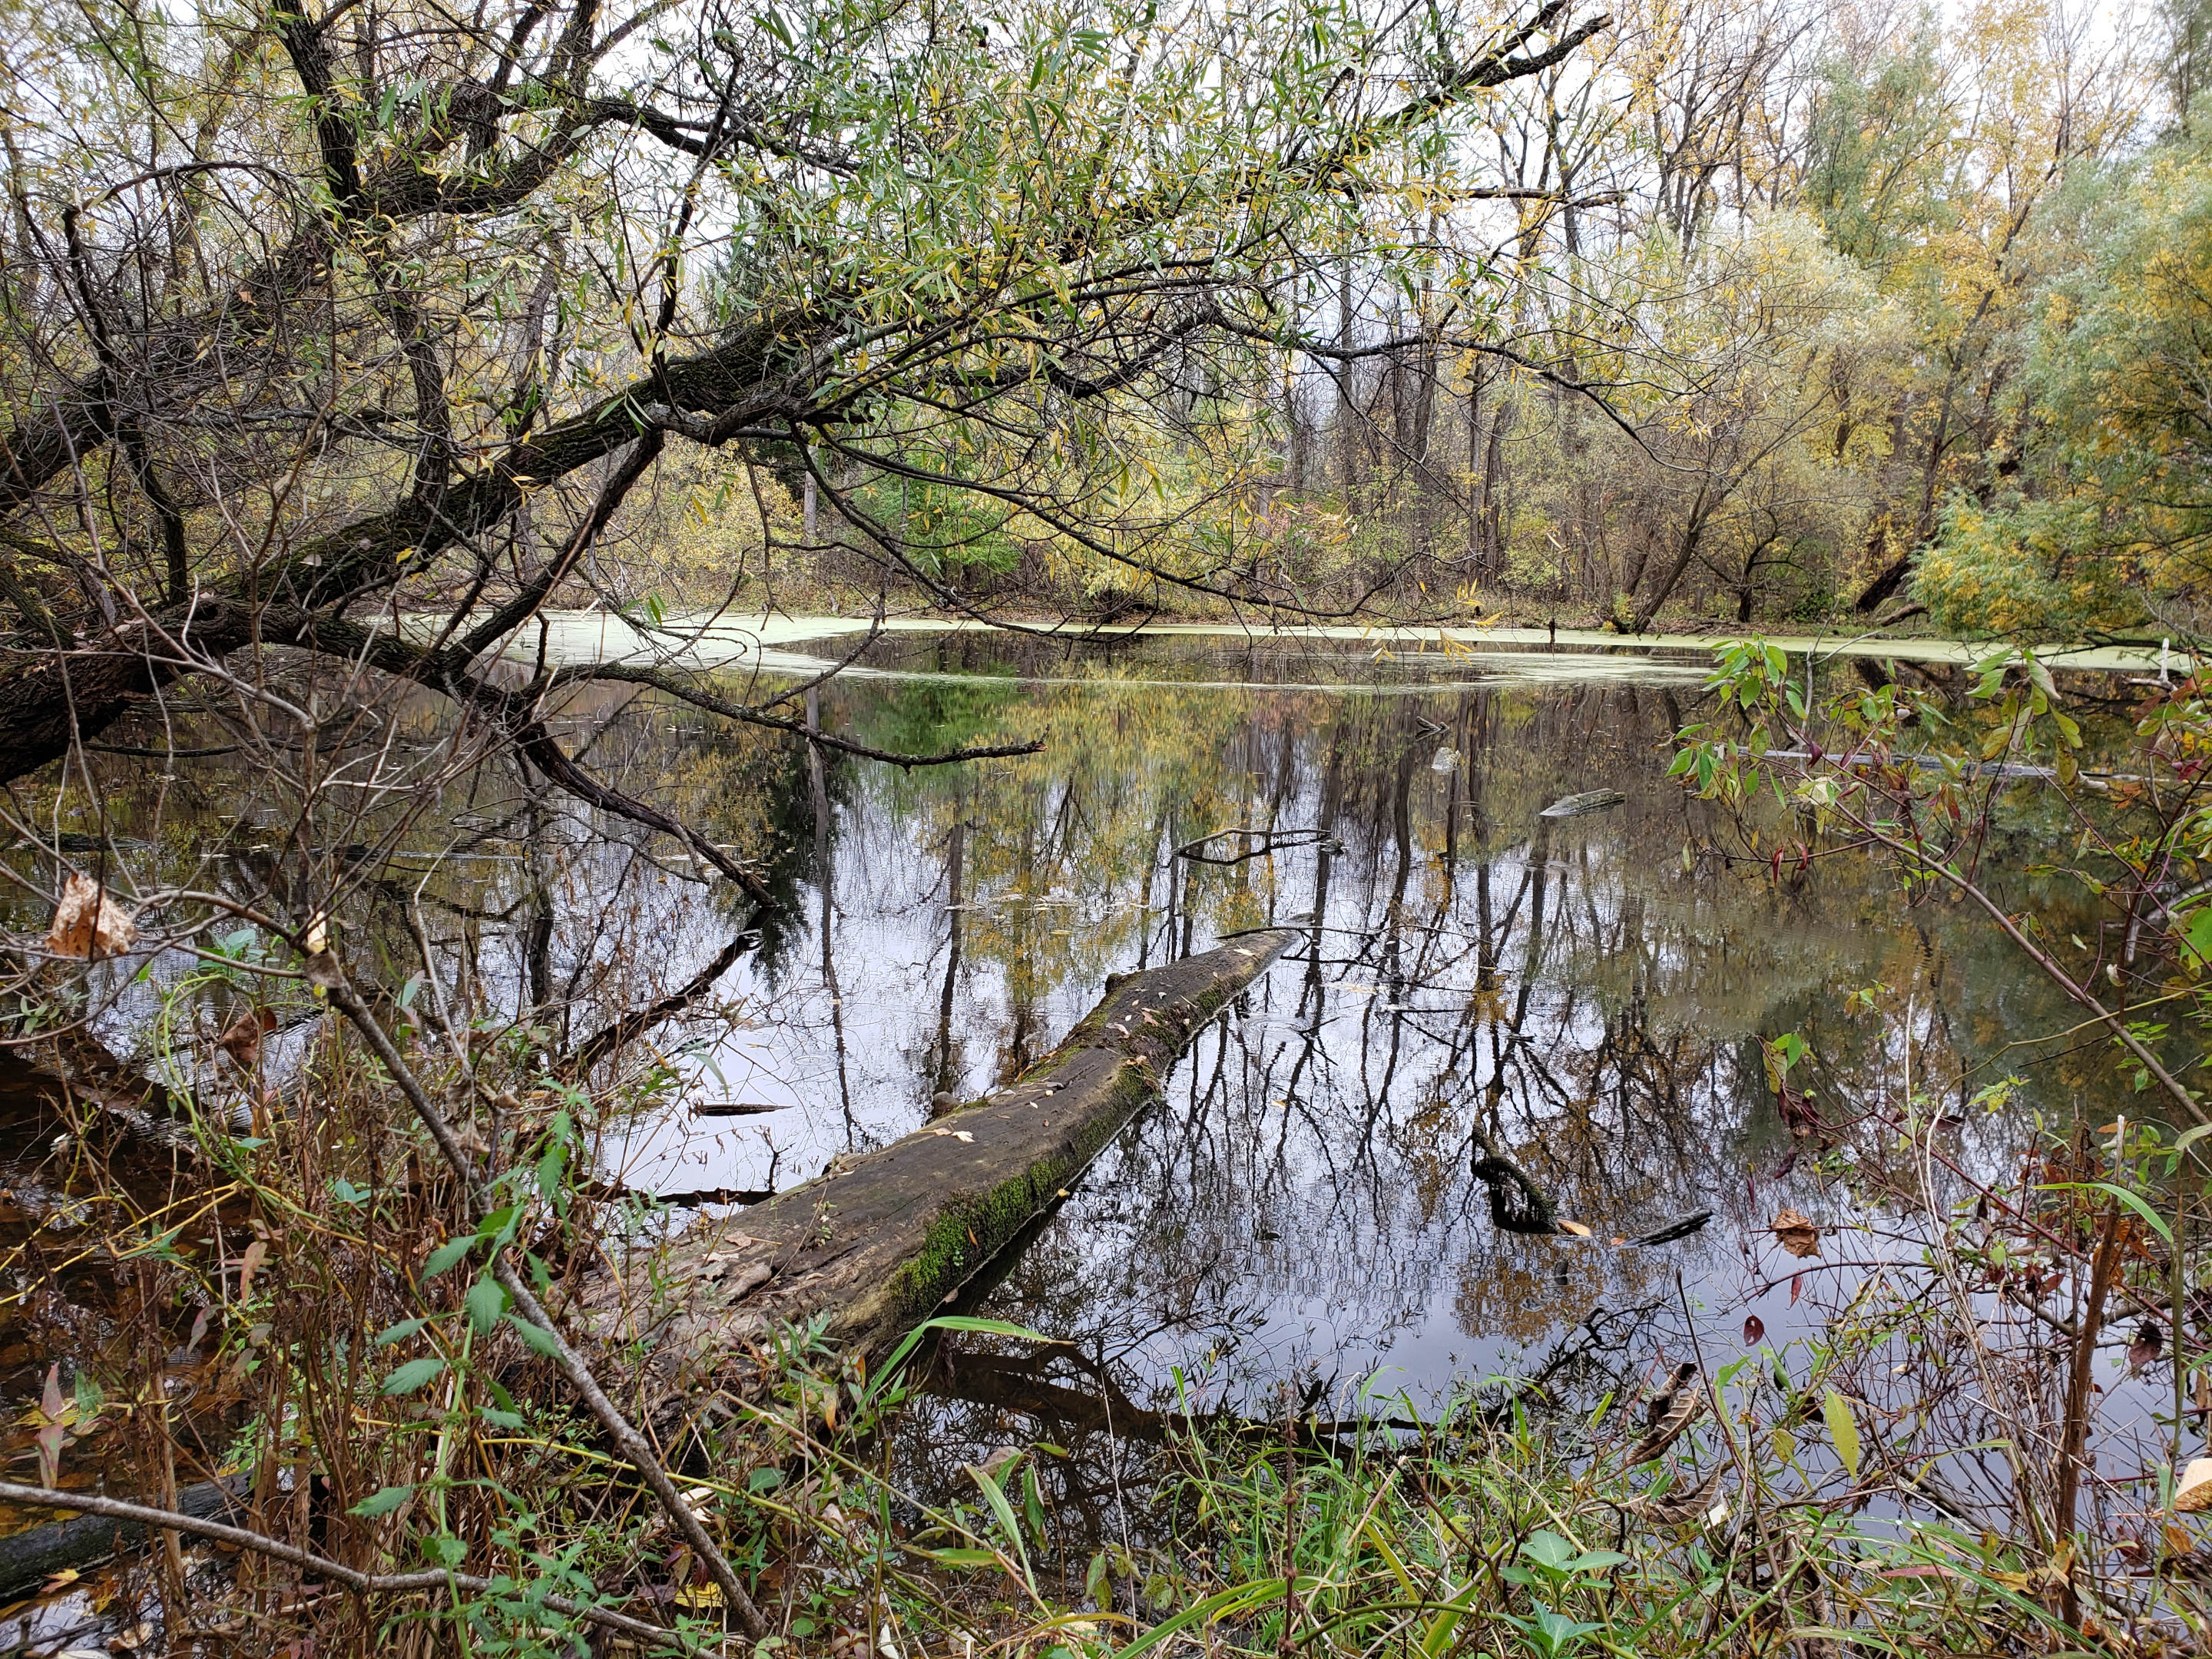 A view of a small shallow pond surrounded by woods.